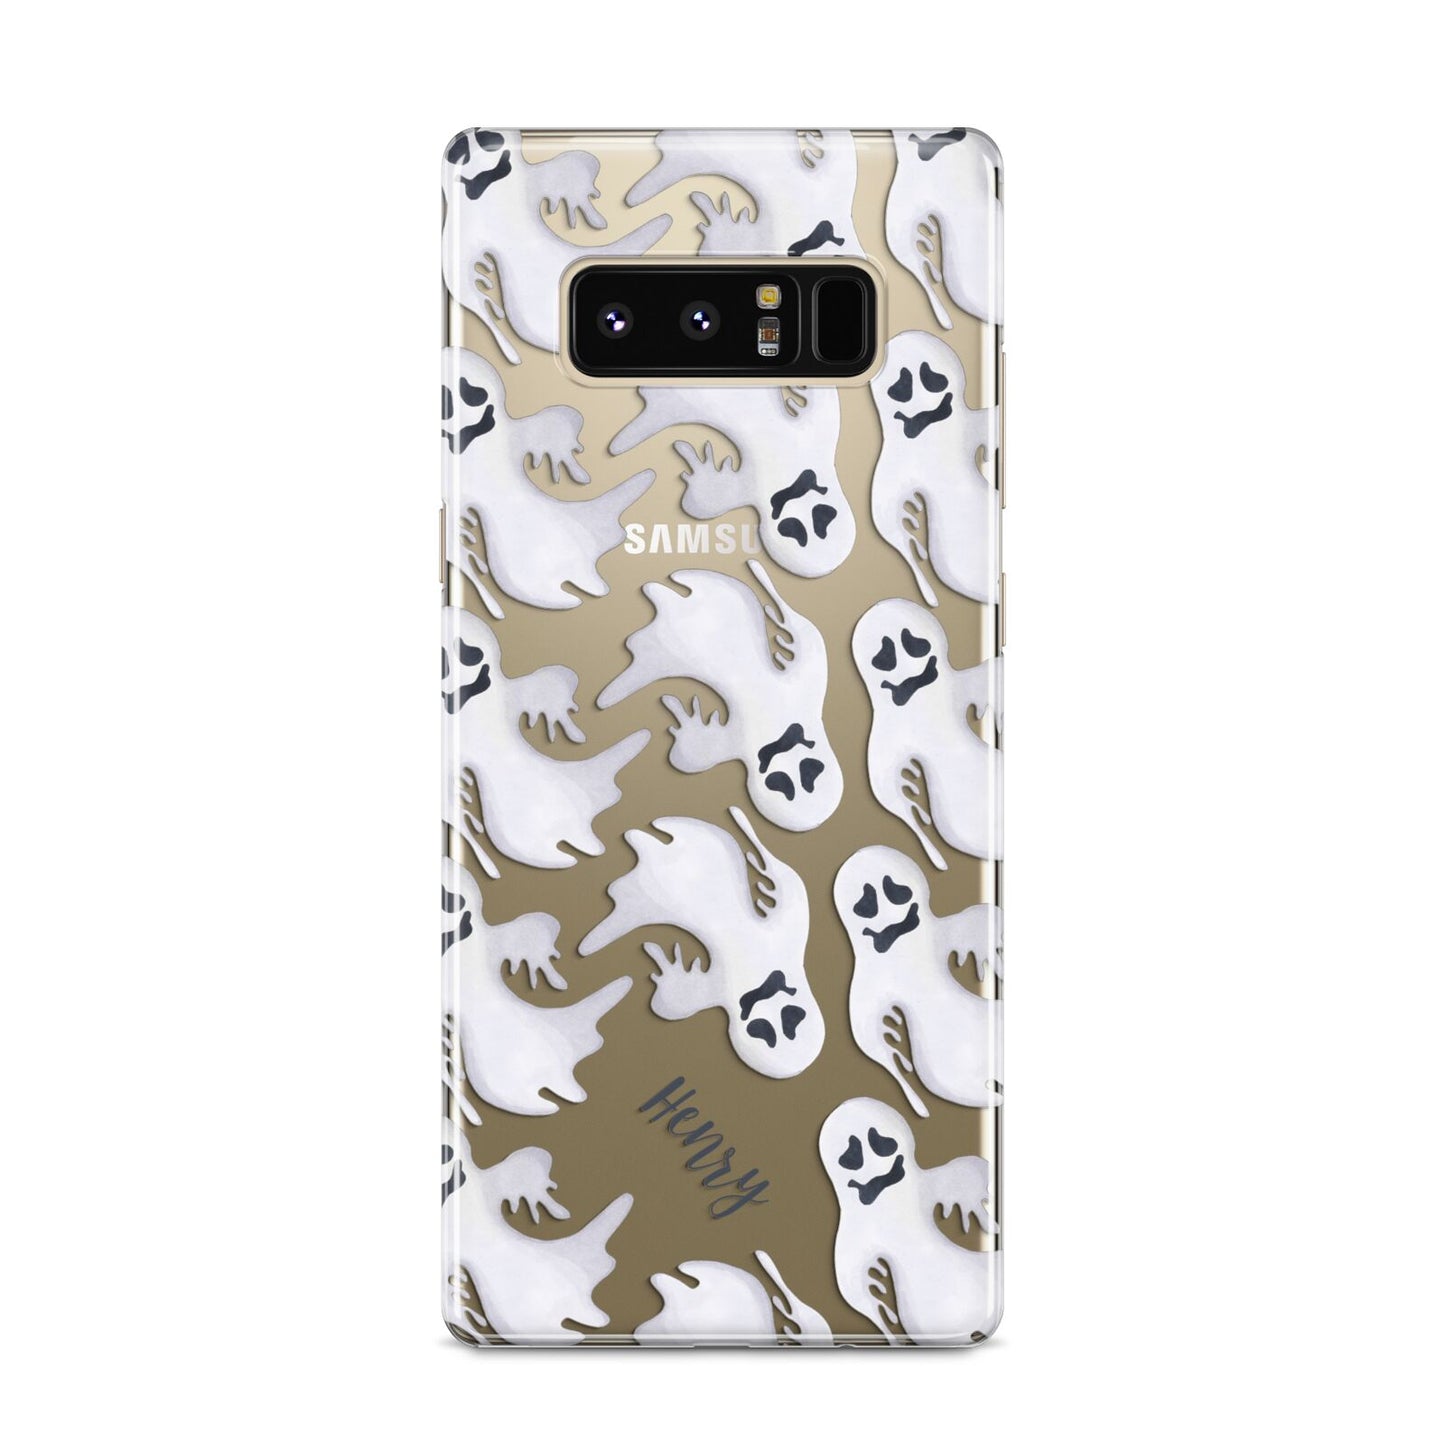 Floaty Ghosts Personalised Samsung Galaxy S8 Case